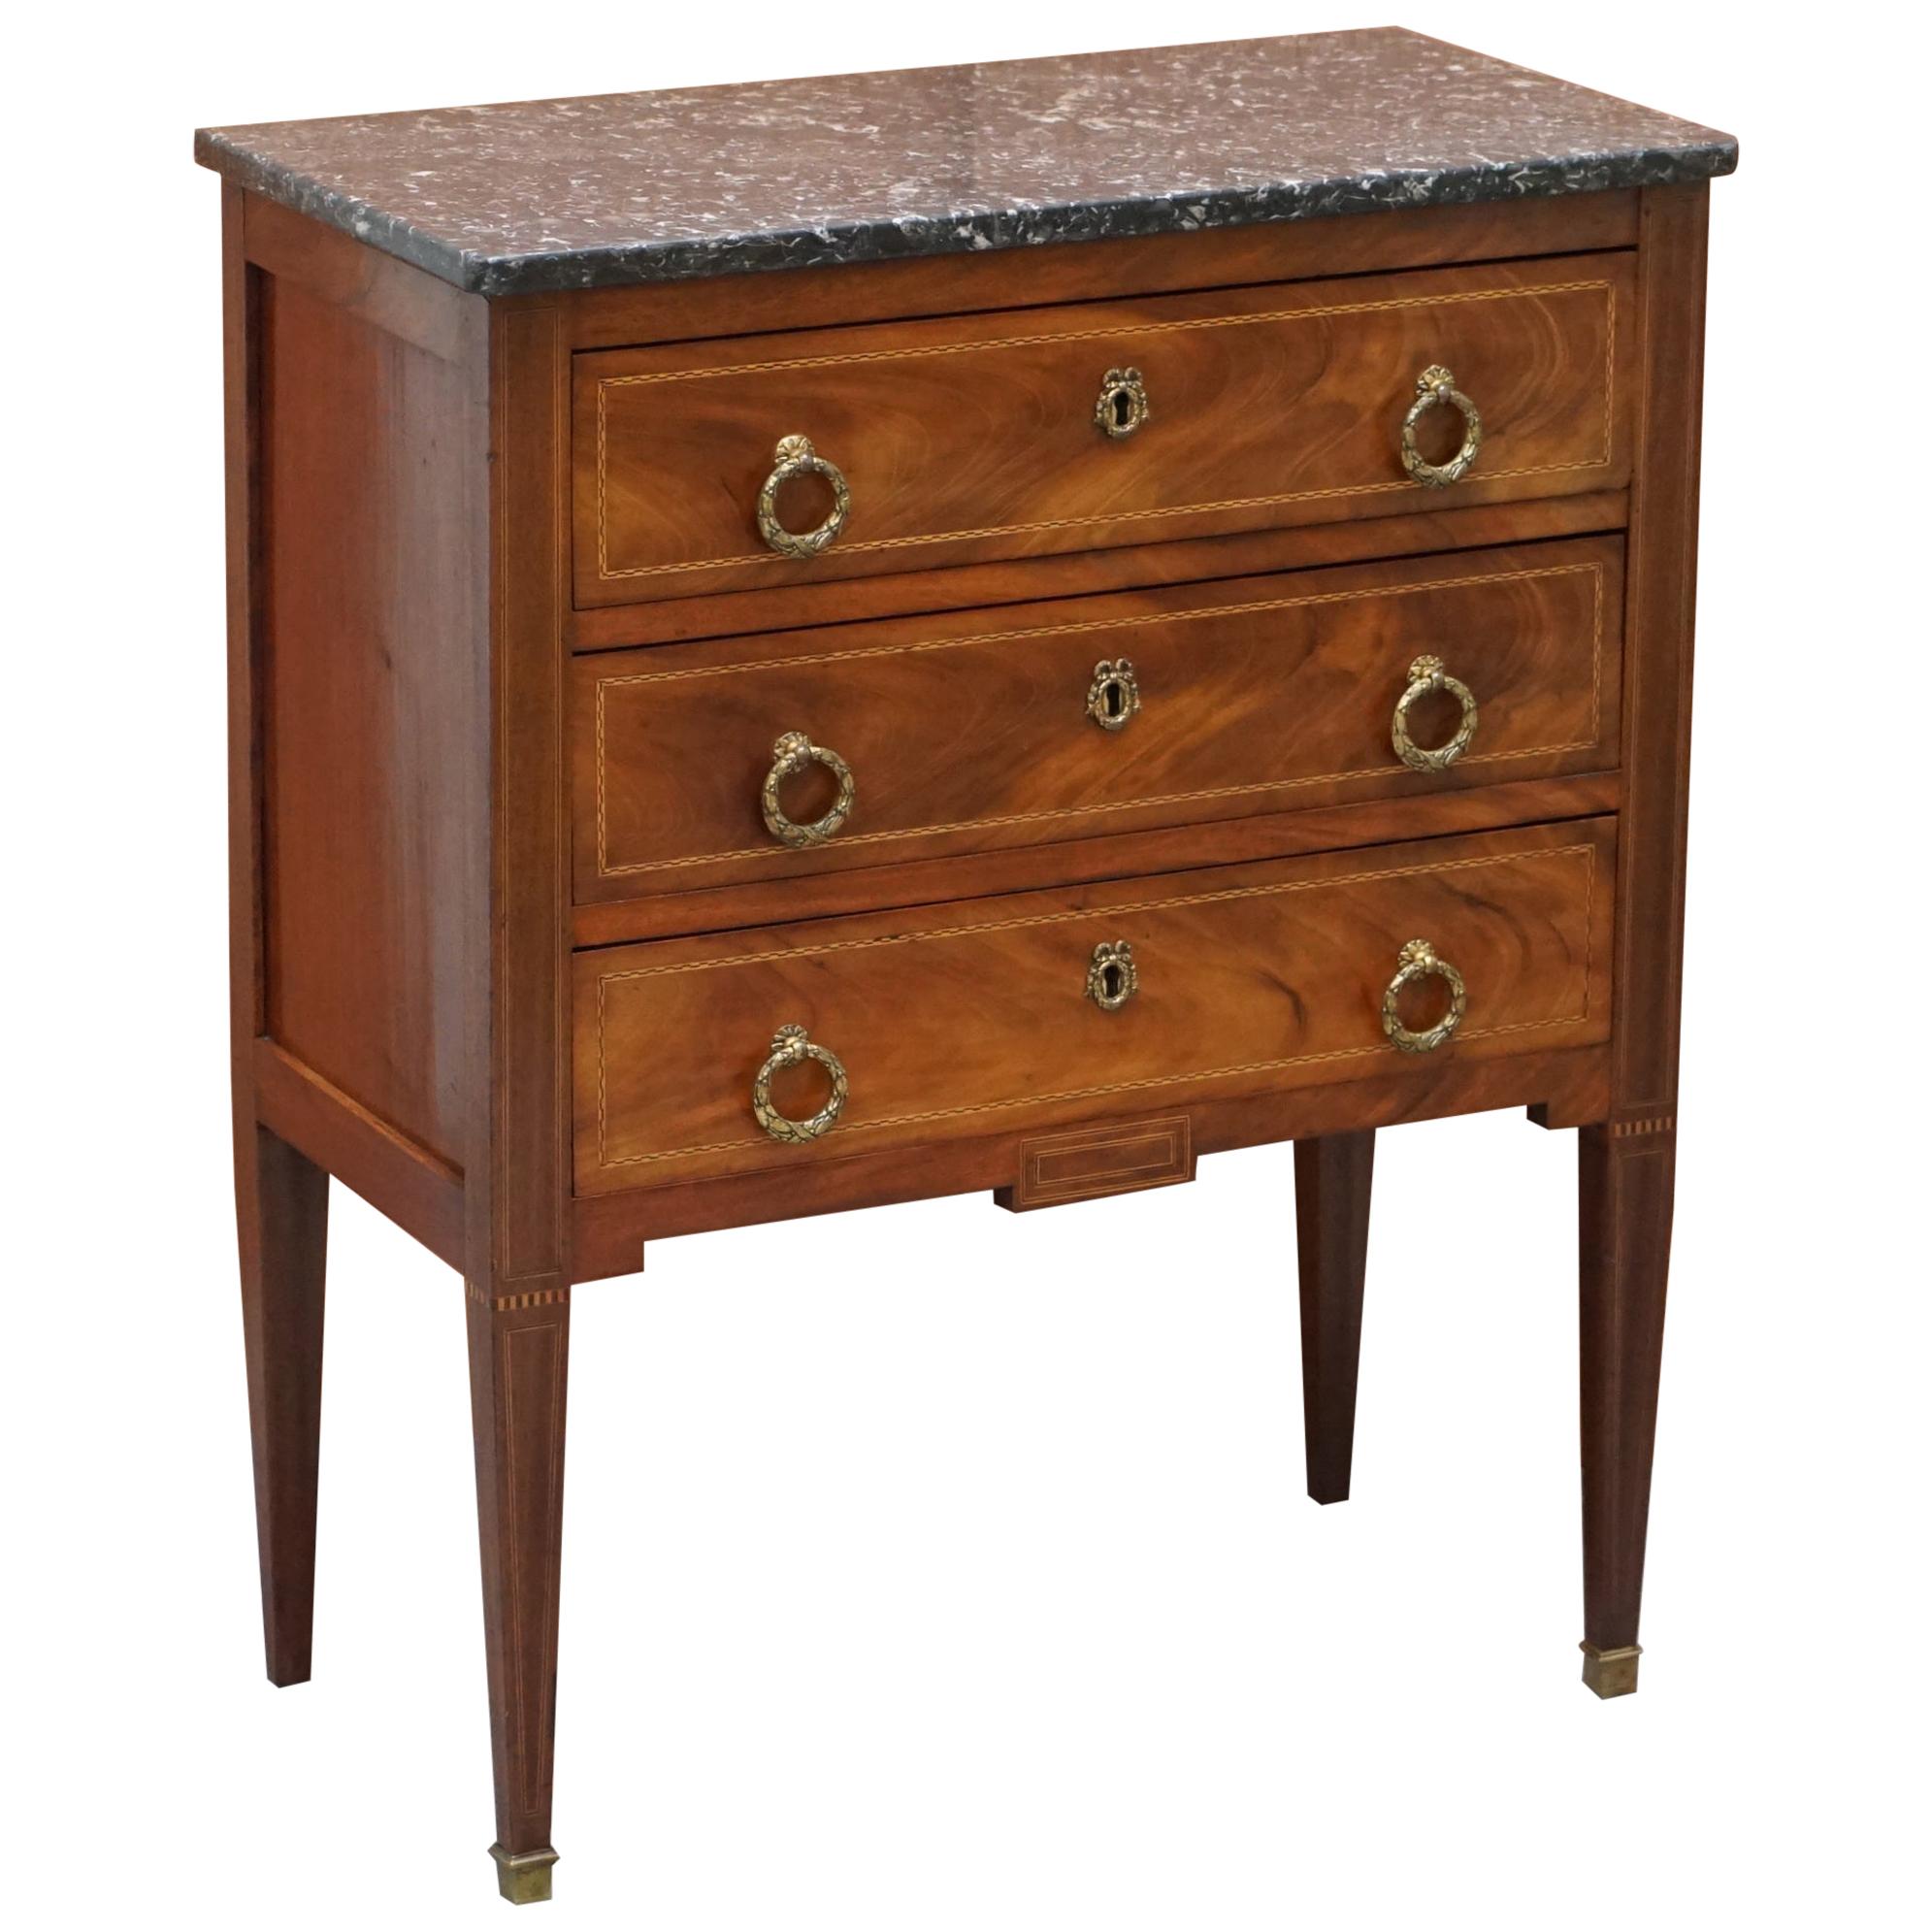 Lovely Neoclassical Cuban Hardwood Marble Topped Side Tables Chest of Drawers